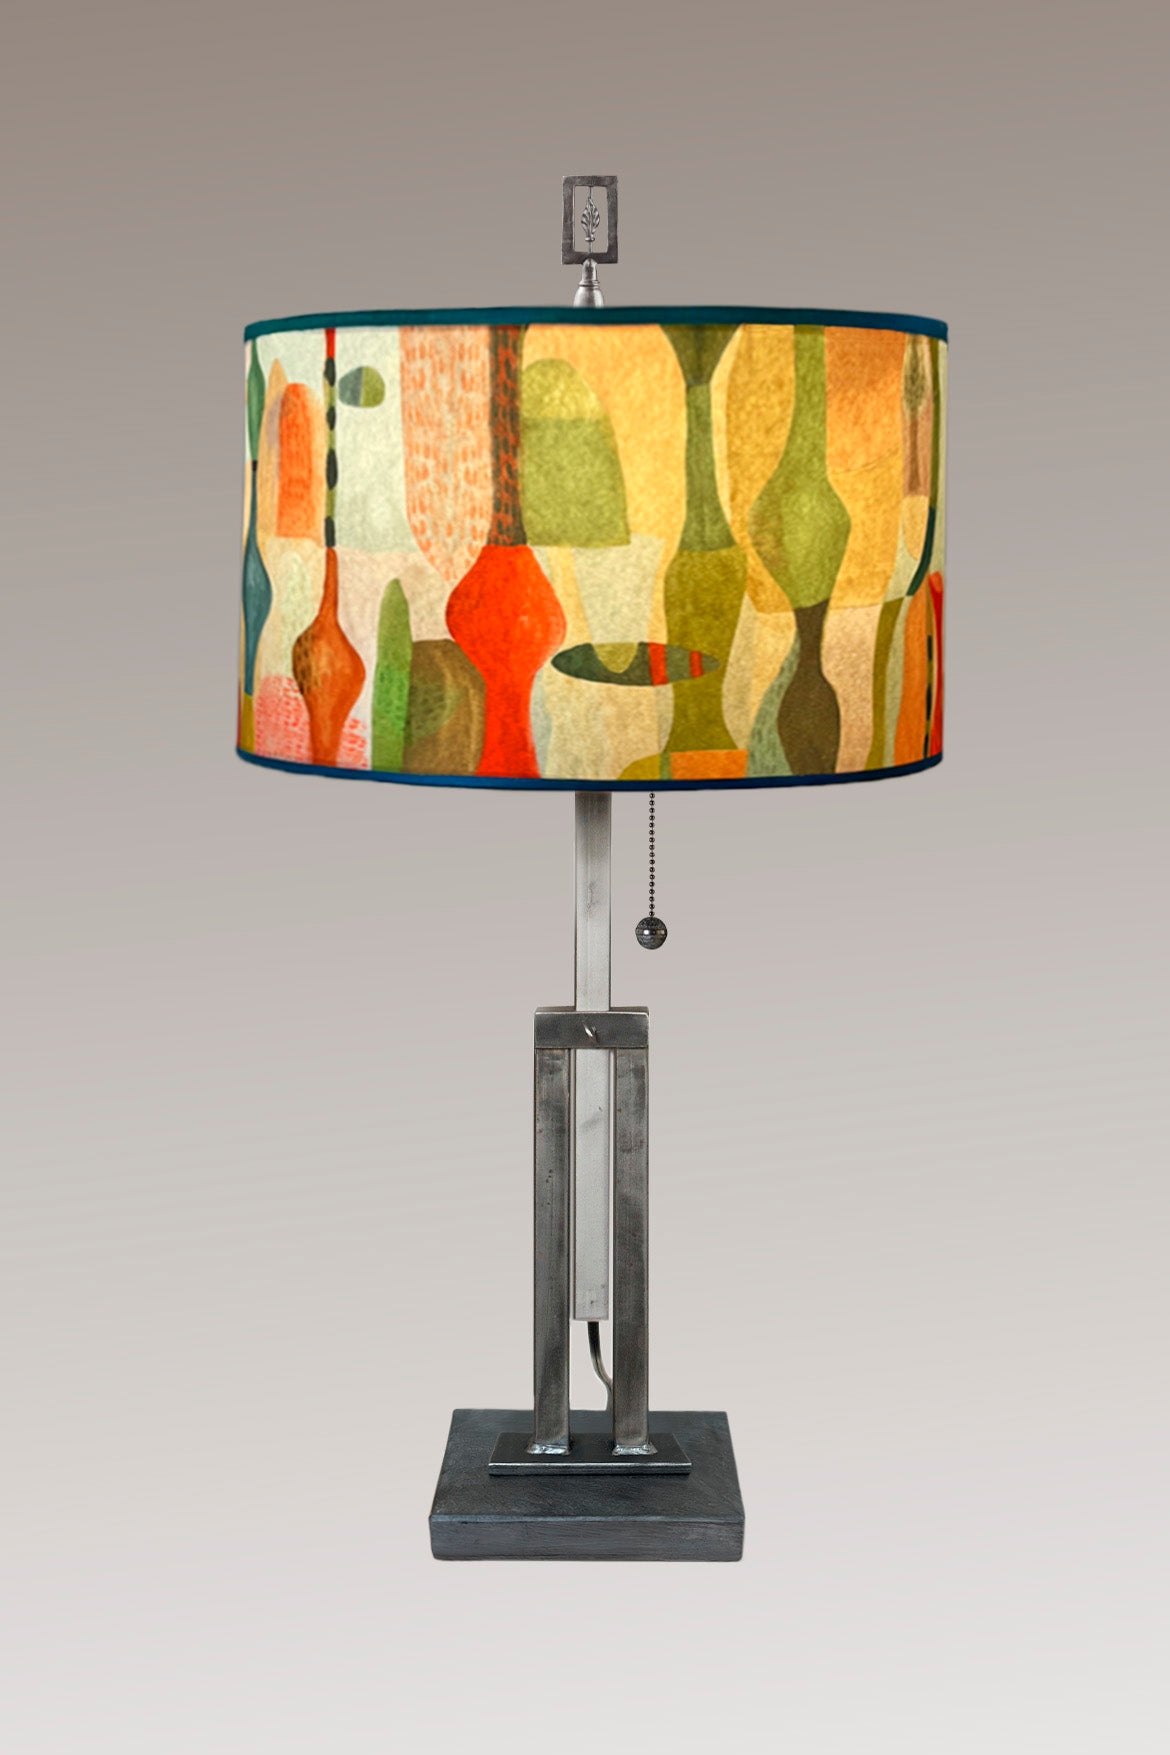 Janna Ugone &amp; Co Table Lamp Adjustable-Height Steel Table Lamp with Large Drum Shade in Riviera in Poppy